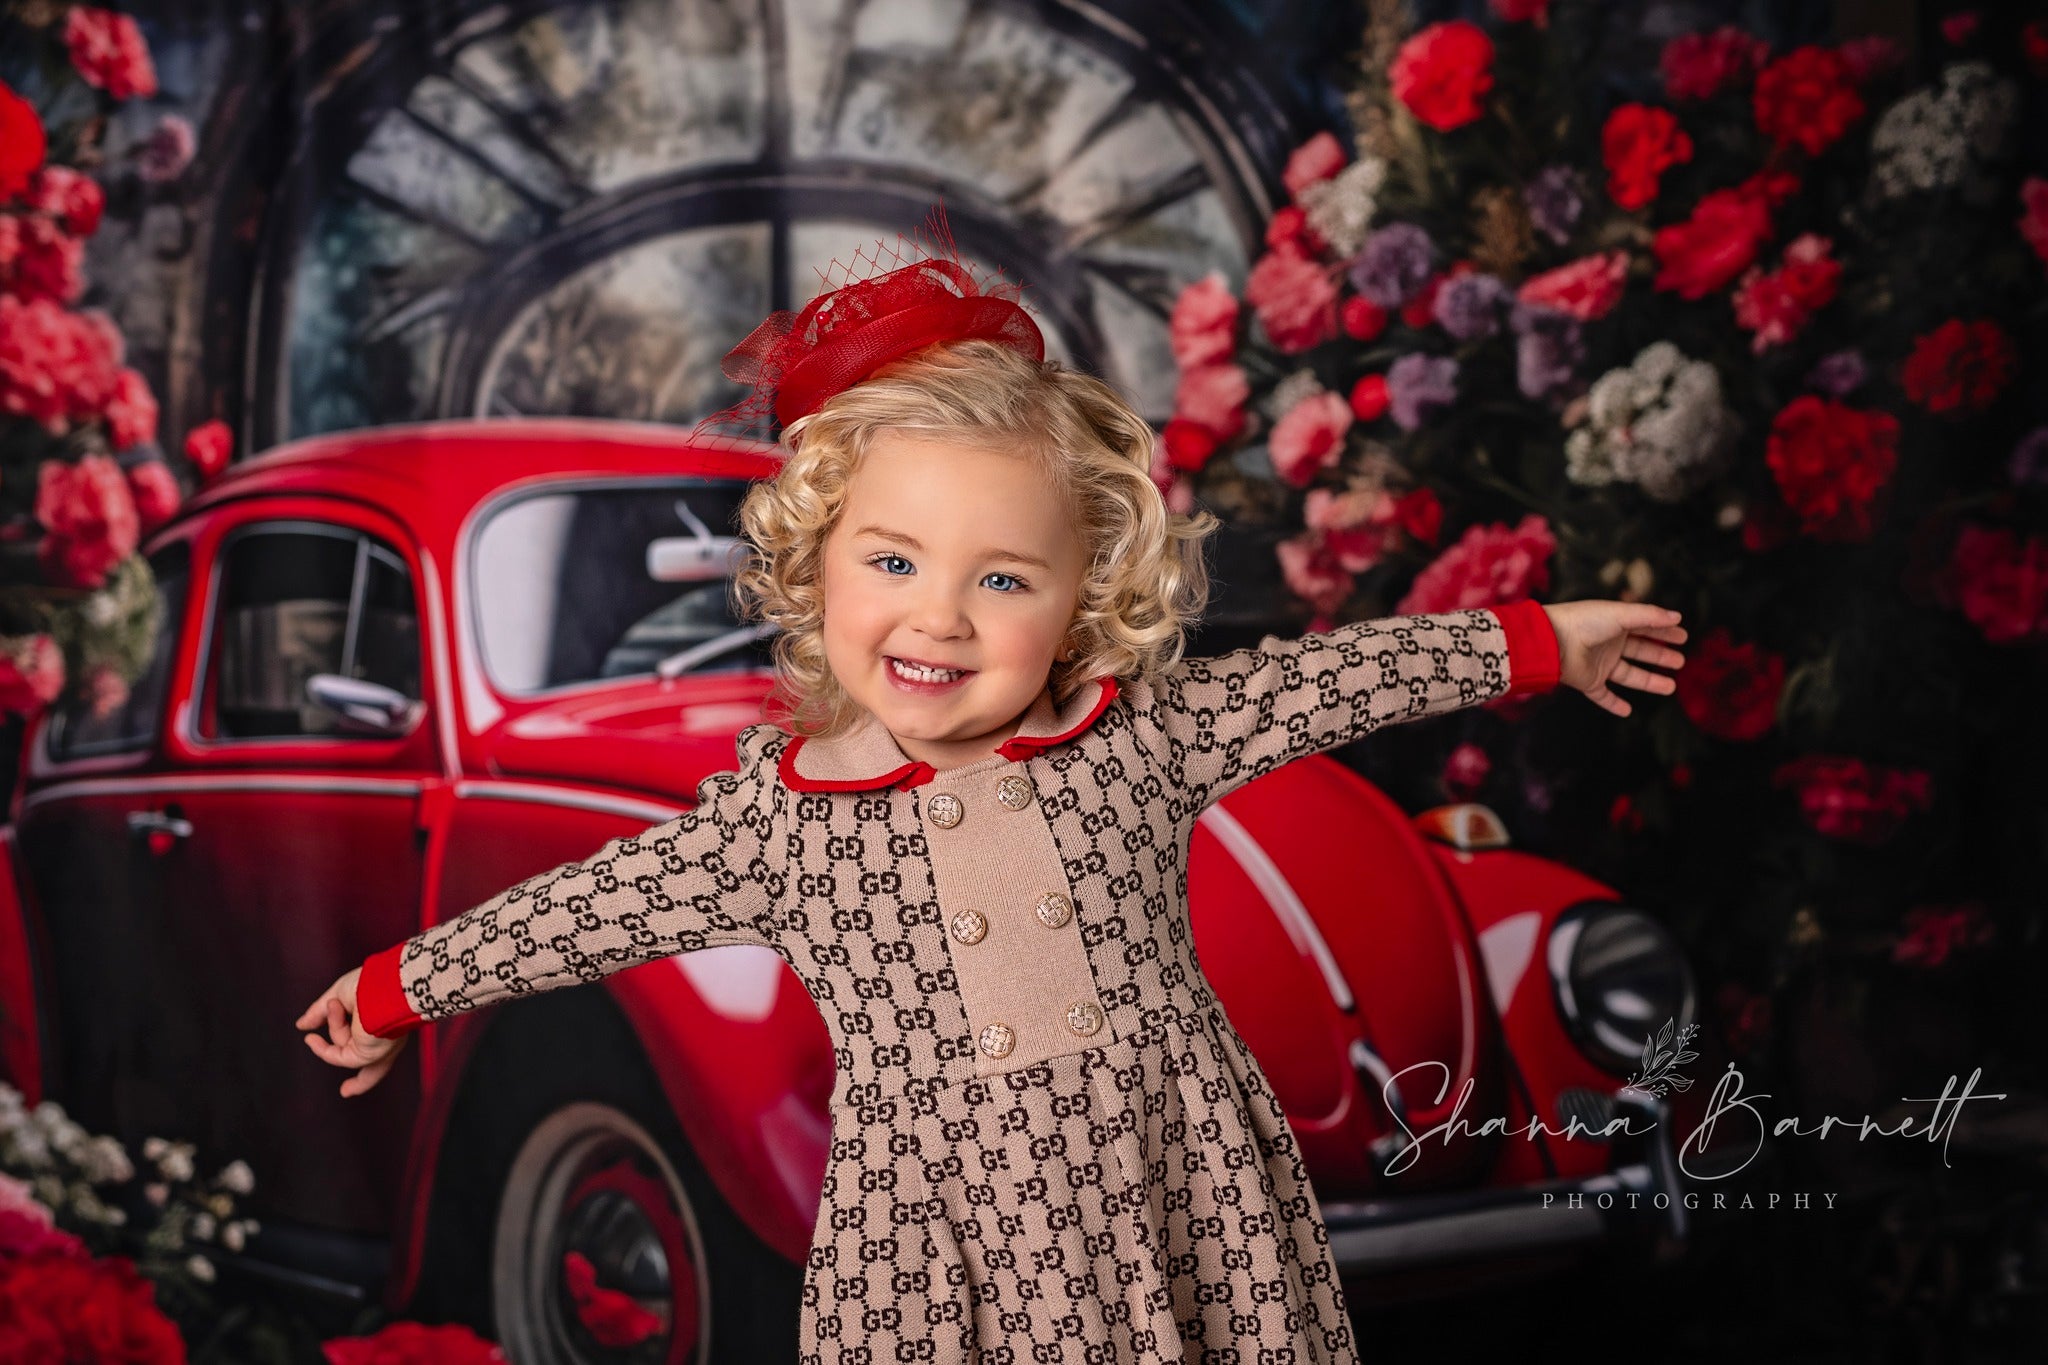 Kate Valentine's Day Red Car Backdrop Designed by Patty Robert